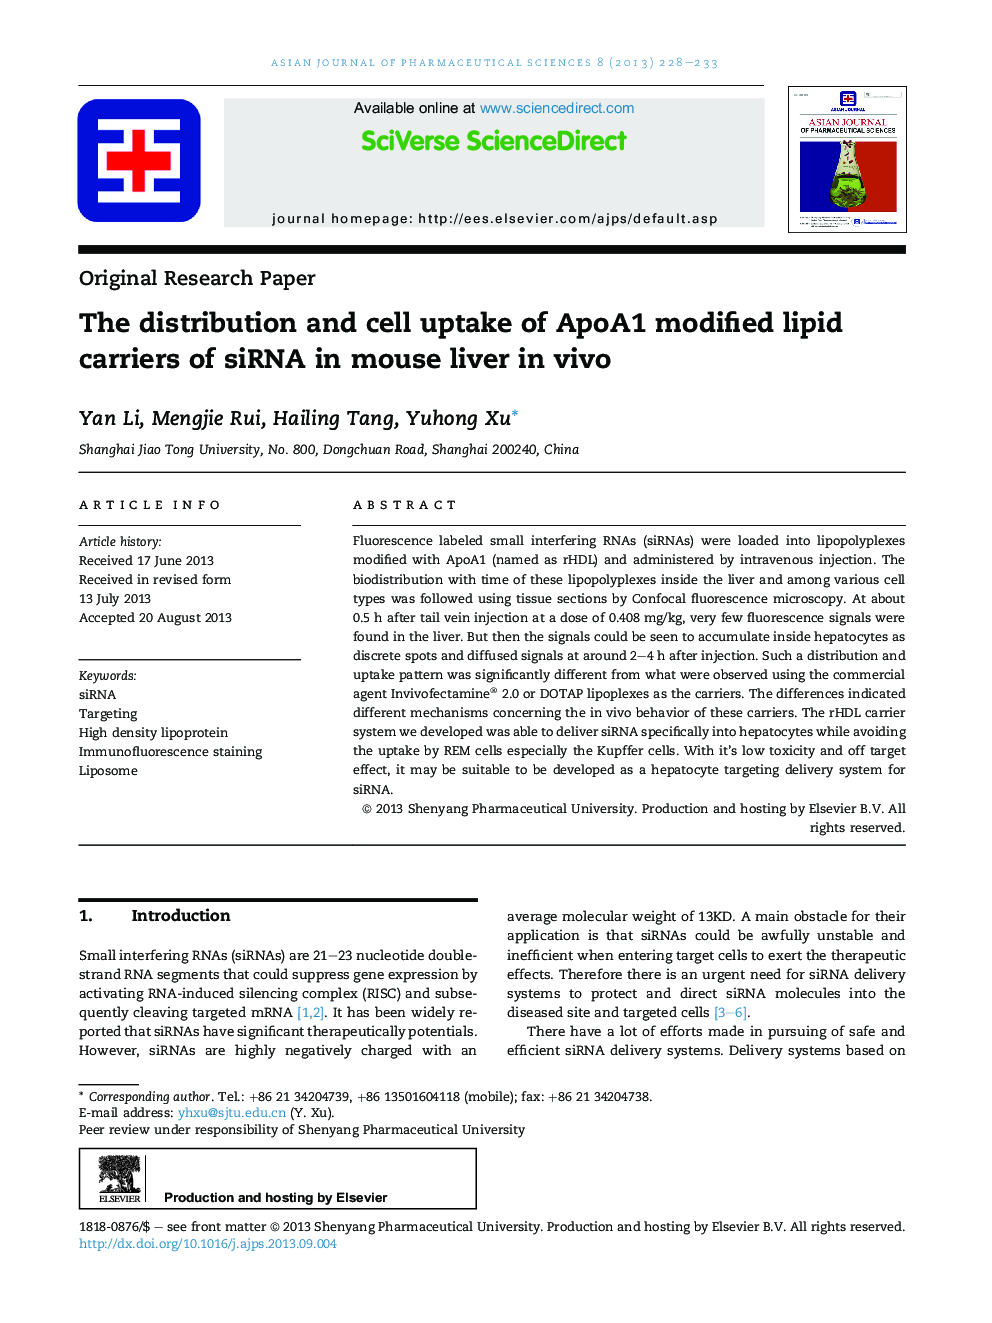 The distribution and cell uptake of ApoA1 modified lipid carriers of siRNA in mouse liver in vivo 